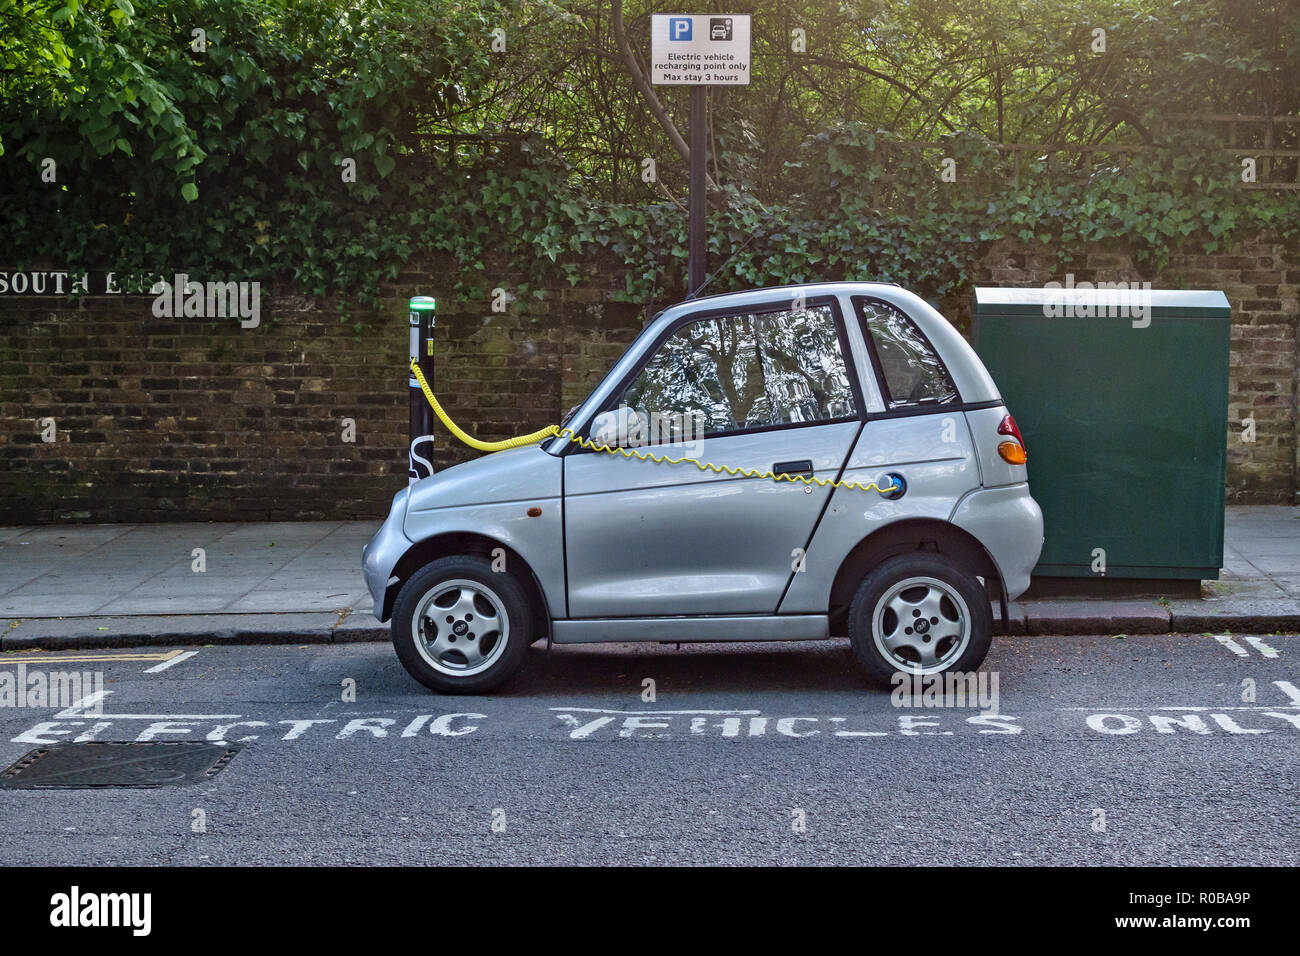 Hampstead, London, UK. A G-Wiz micro electric car at a kerbside recharging point in a marked bay Stock Photo